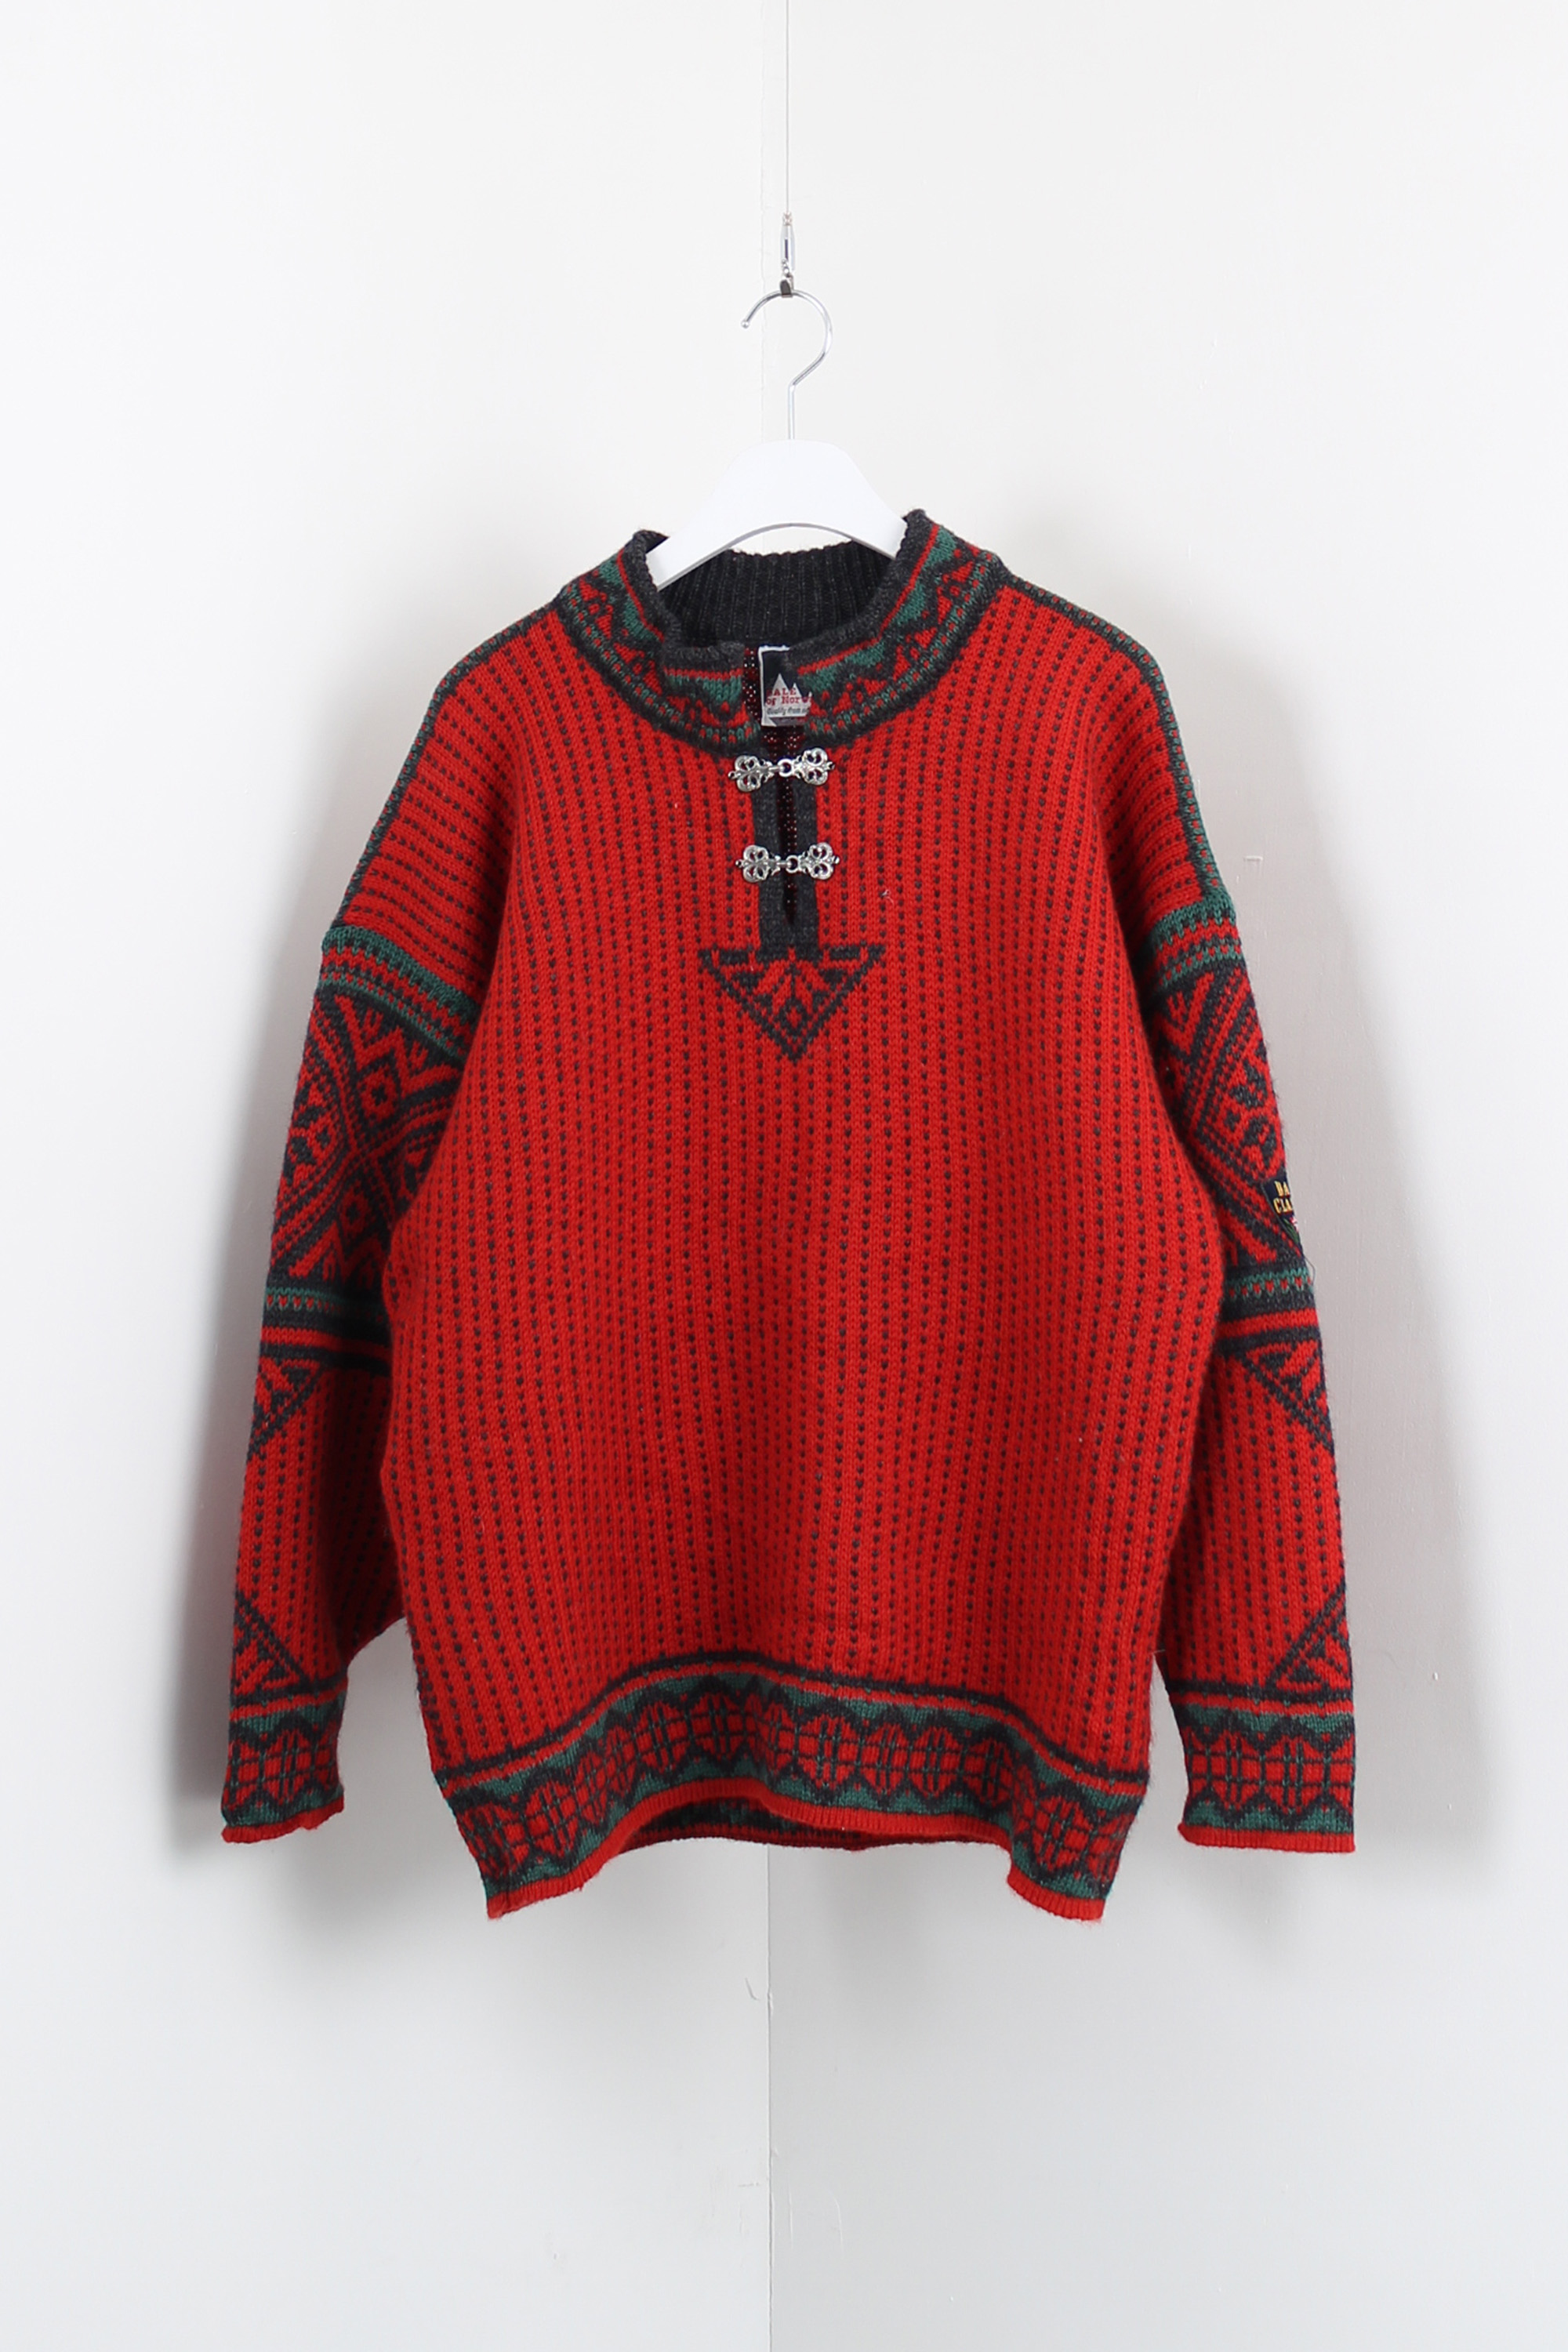 dale of norway knit